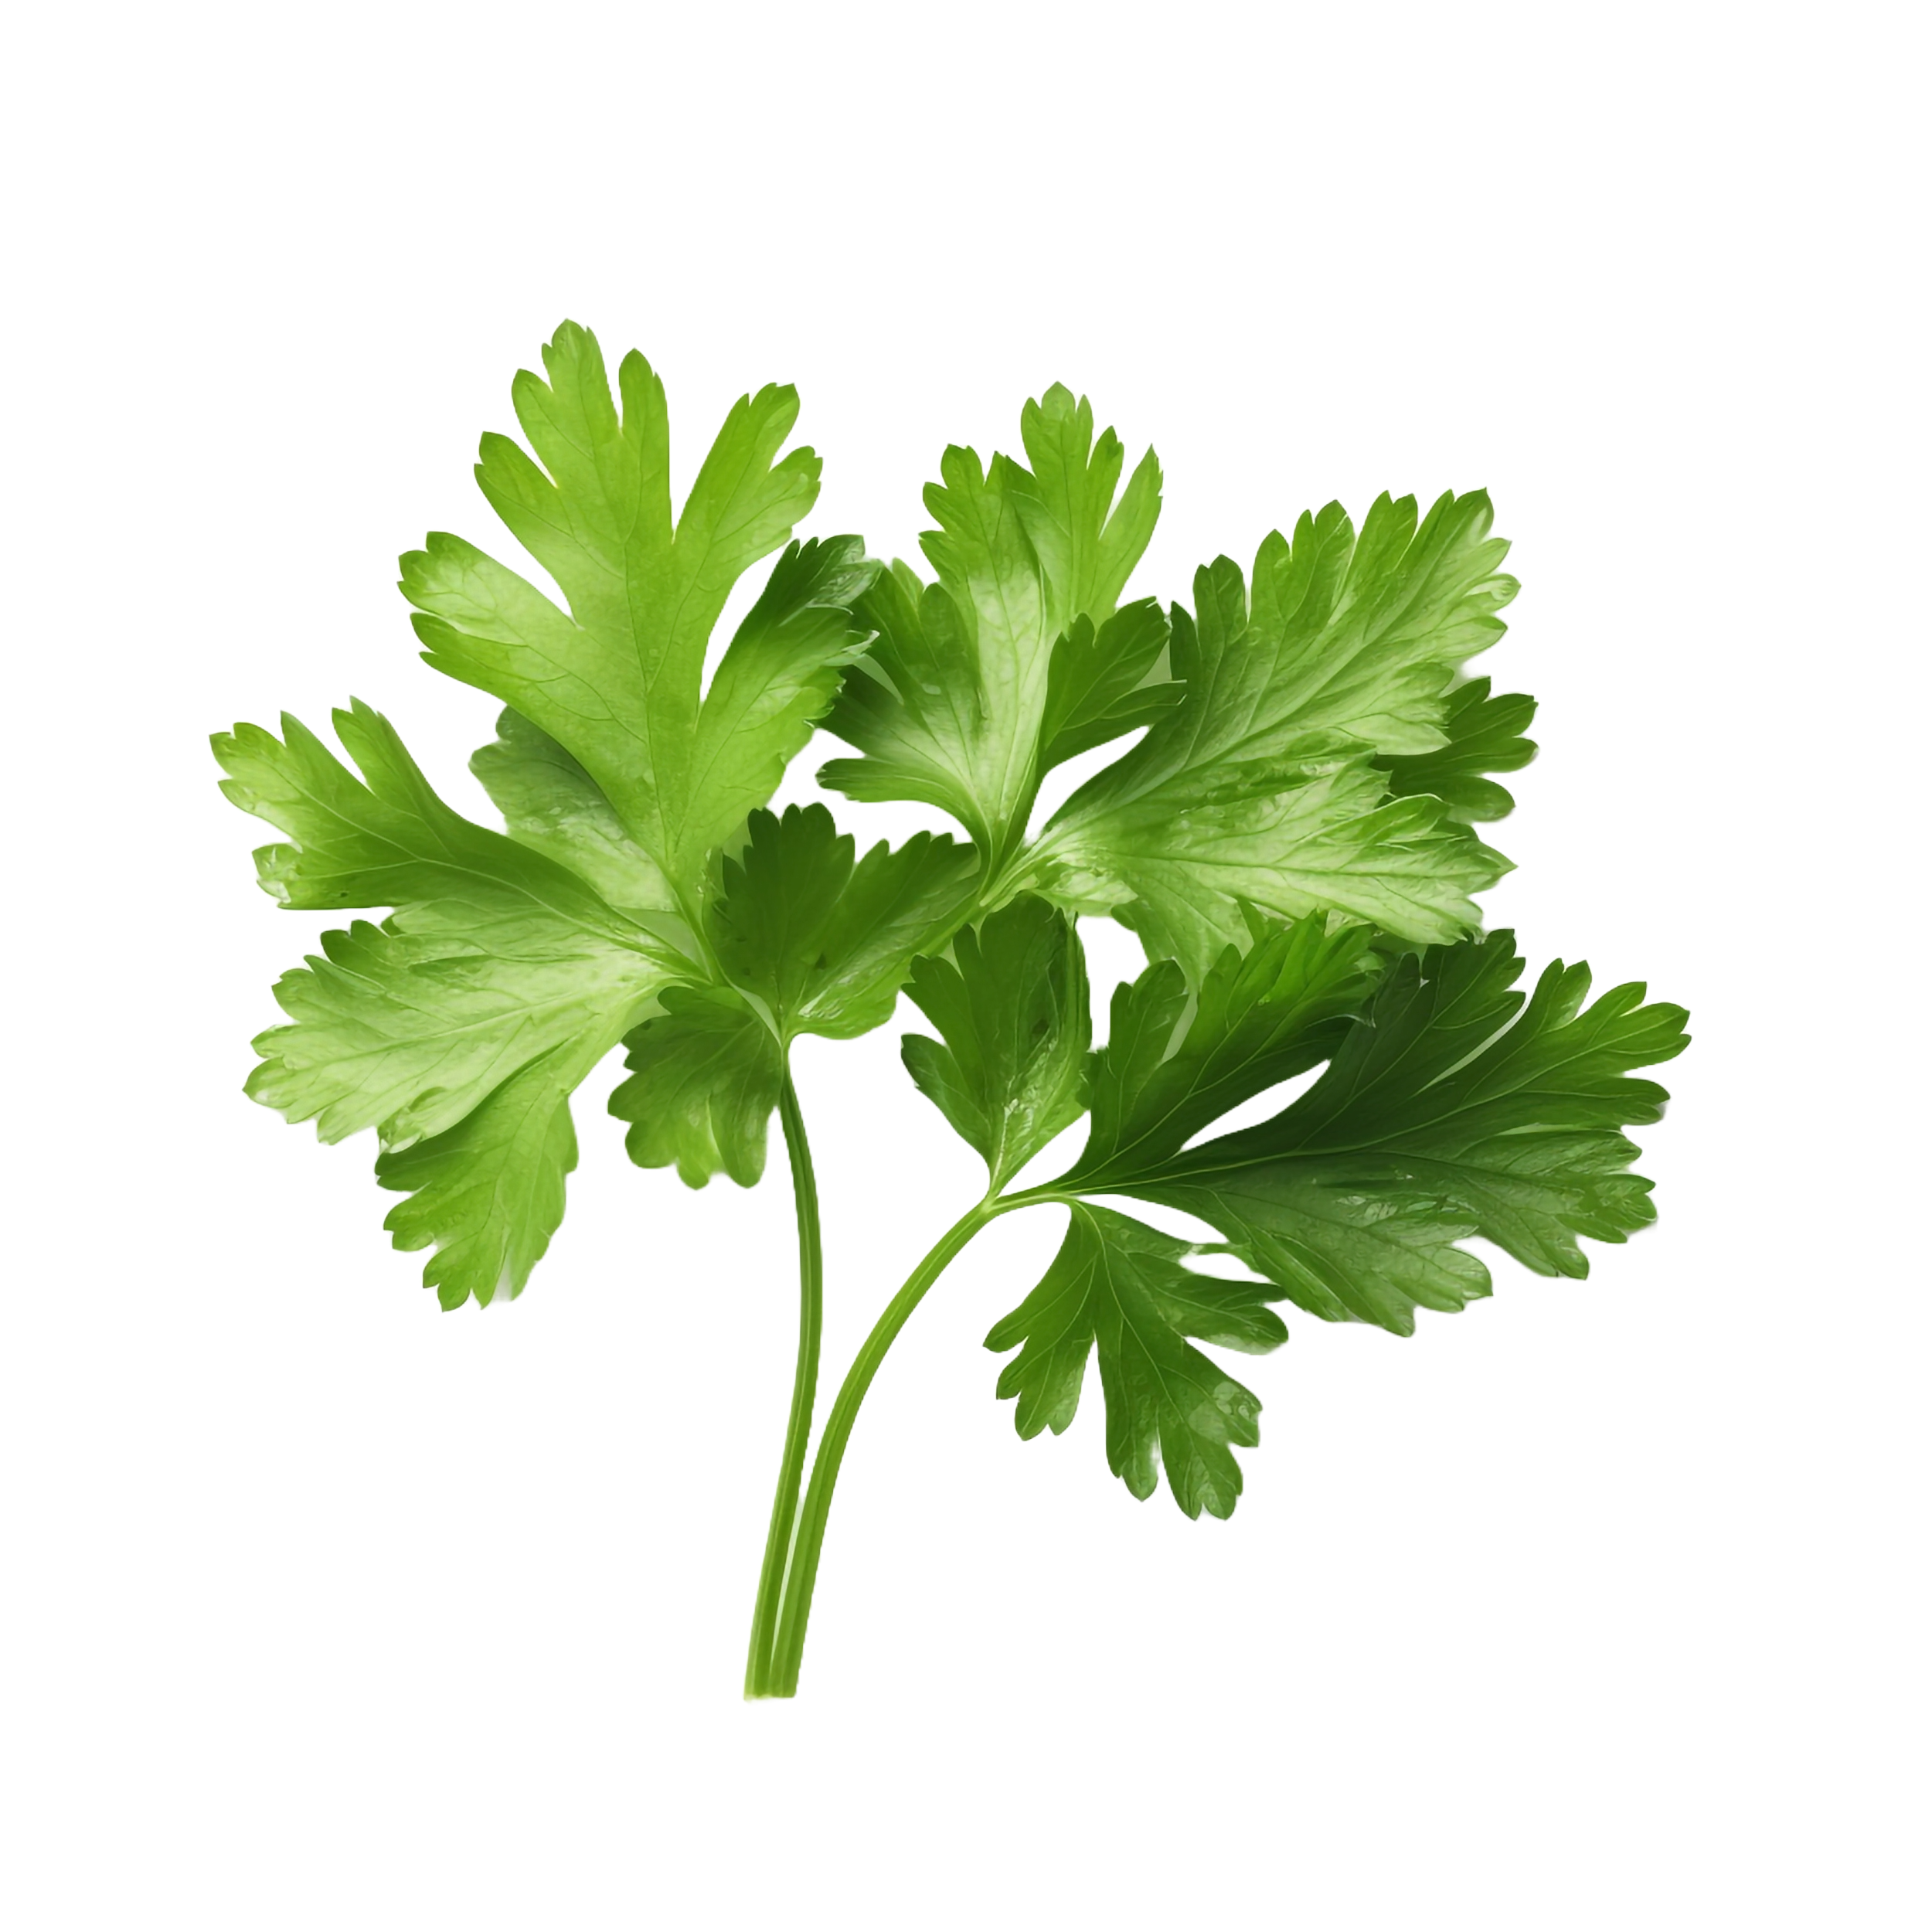 Parsley leaves in a closeup -14.png__PID:7b968771-4e6c-460d-8382-cfc4582abf95